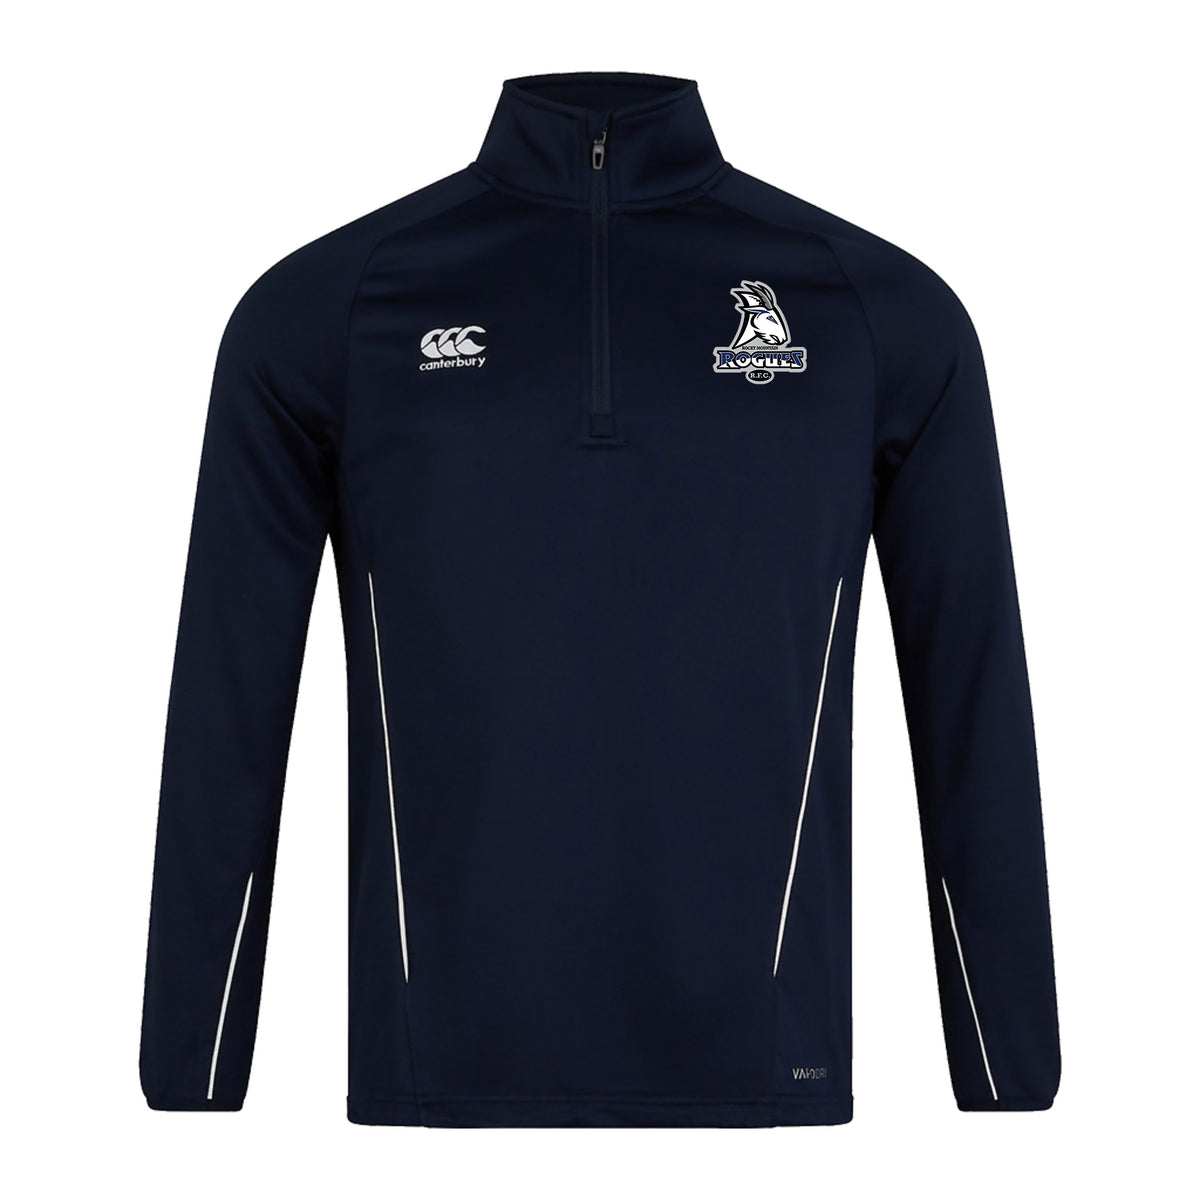 Rocky Mountain Rogues Canterbury CCC Team 1/4 Zip Mid Layer Rugby Training Top - Unisex